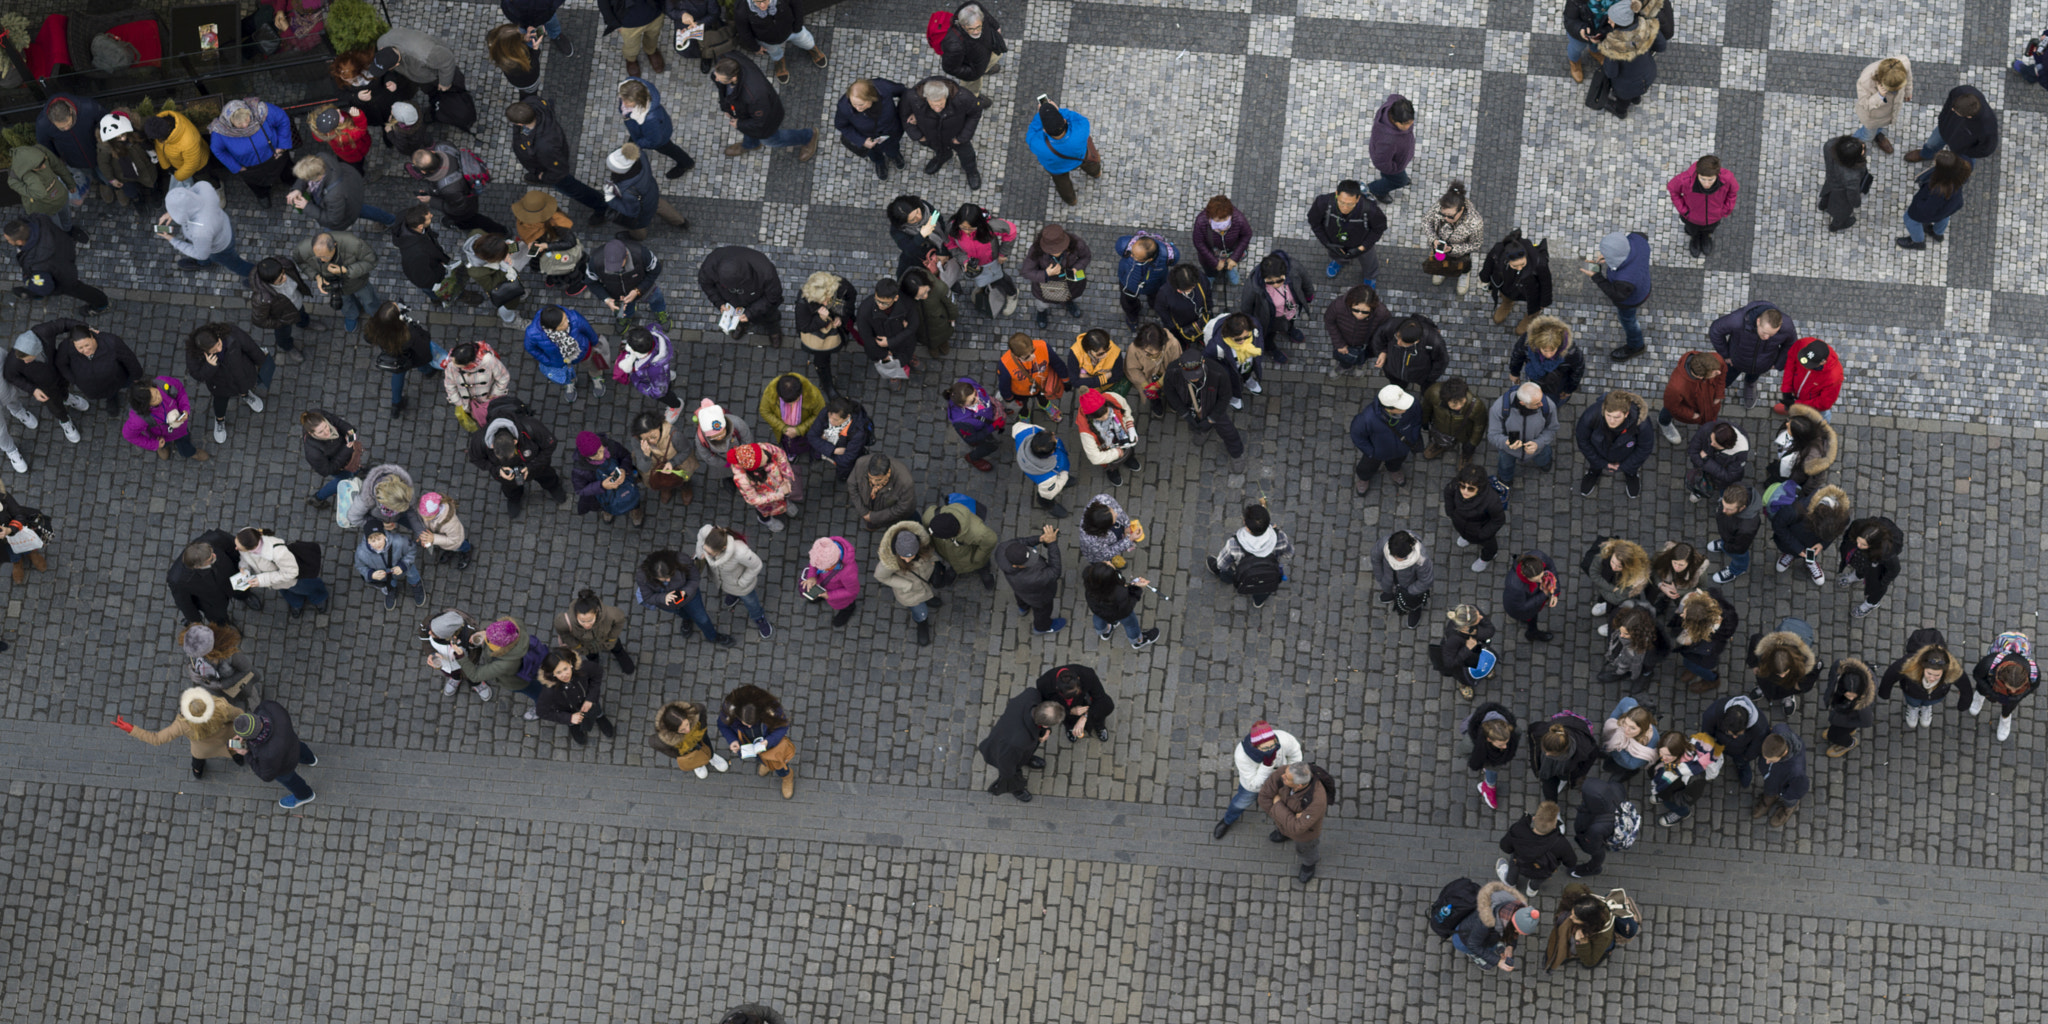 Hasselblad X1D-50c sample photo. High angle view of group of people at old town square, prague, c photography